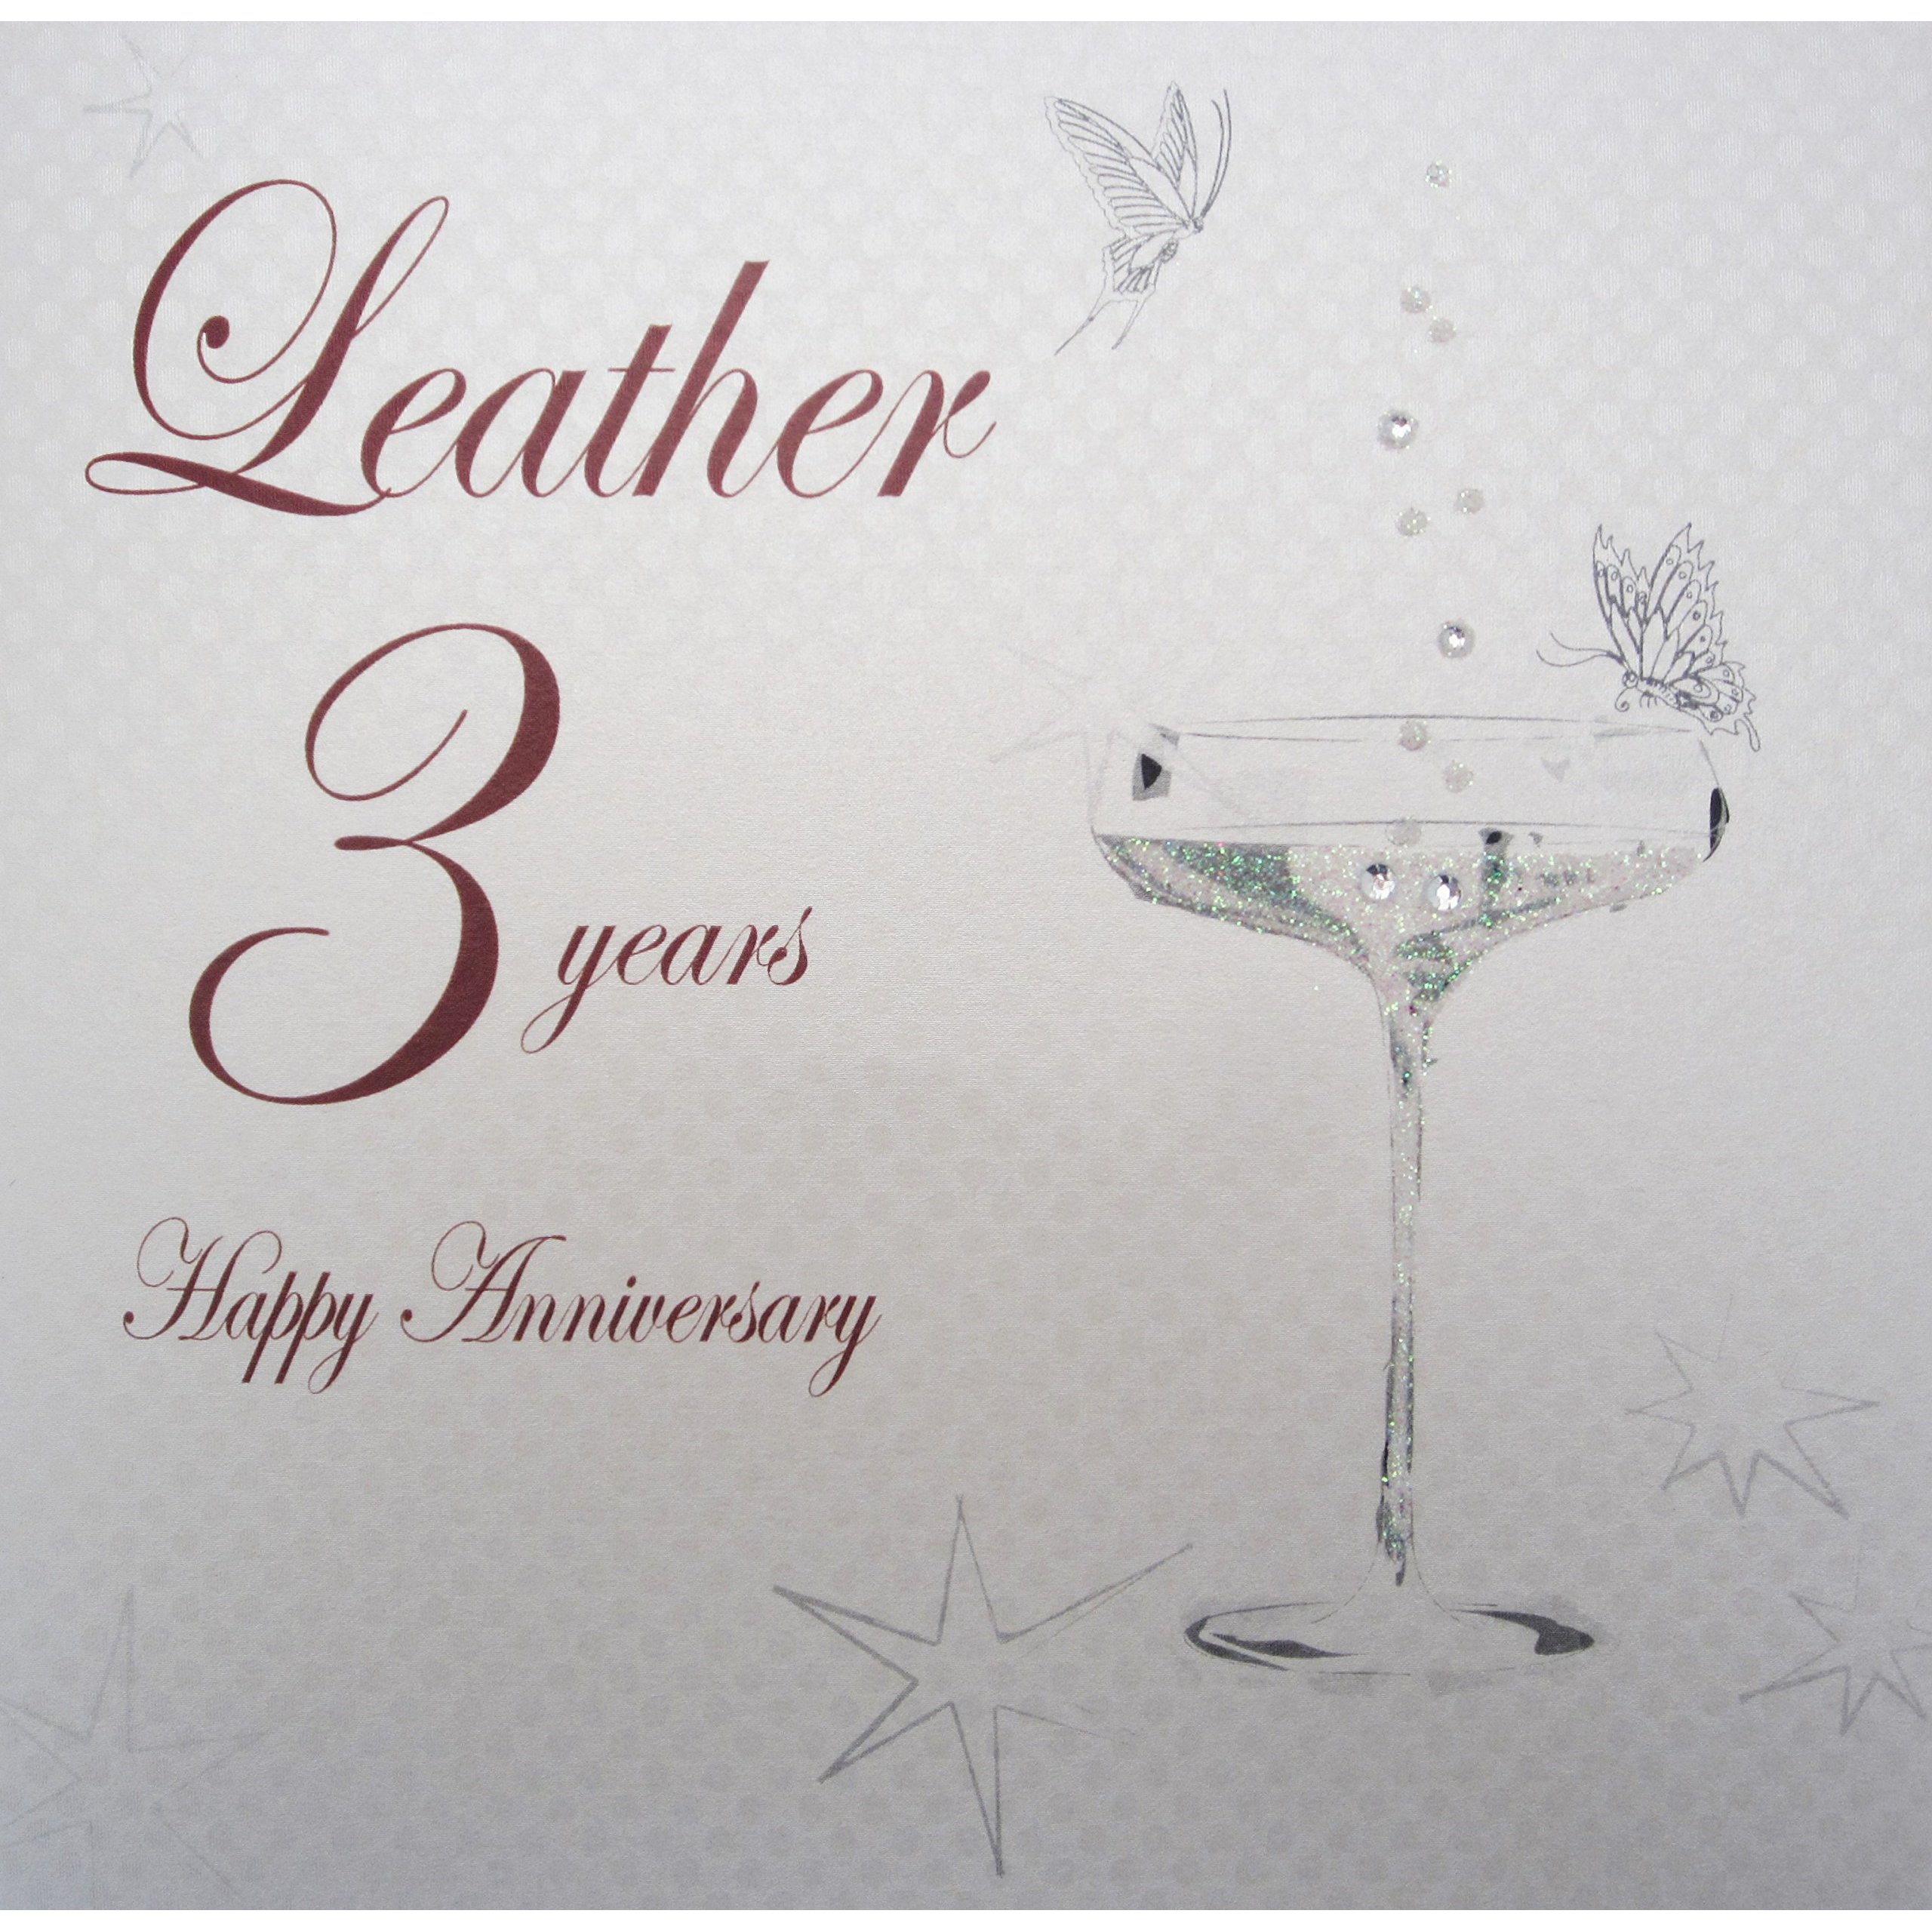 WHITE COTTON CARDS BD103C Coupe Glass Happy Anniversary 'Leather' 3 Years Handmade Anniversary Card, White